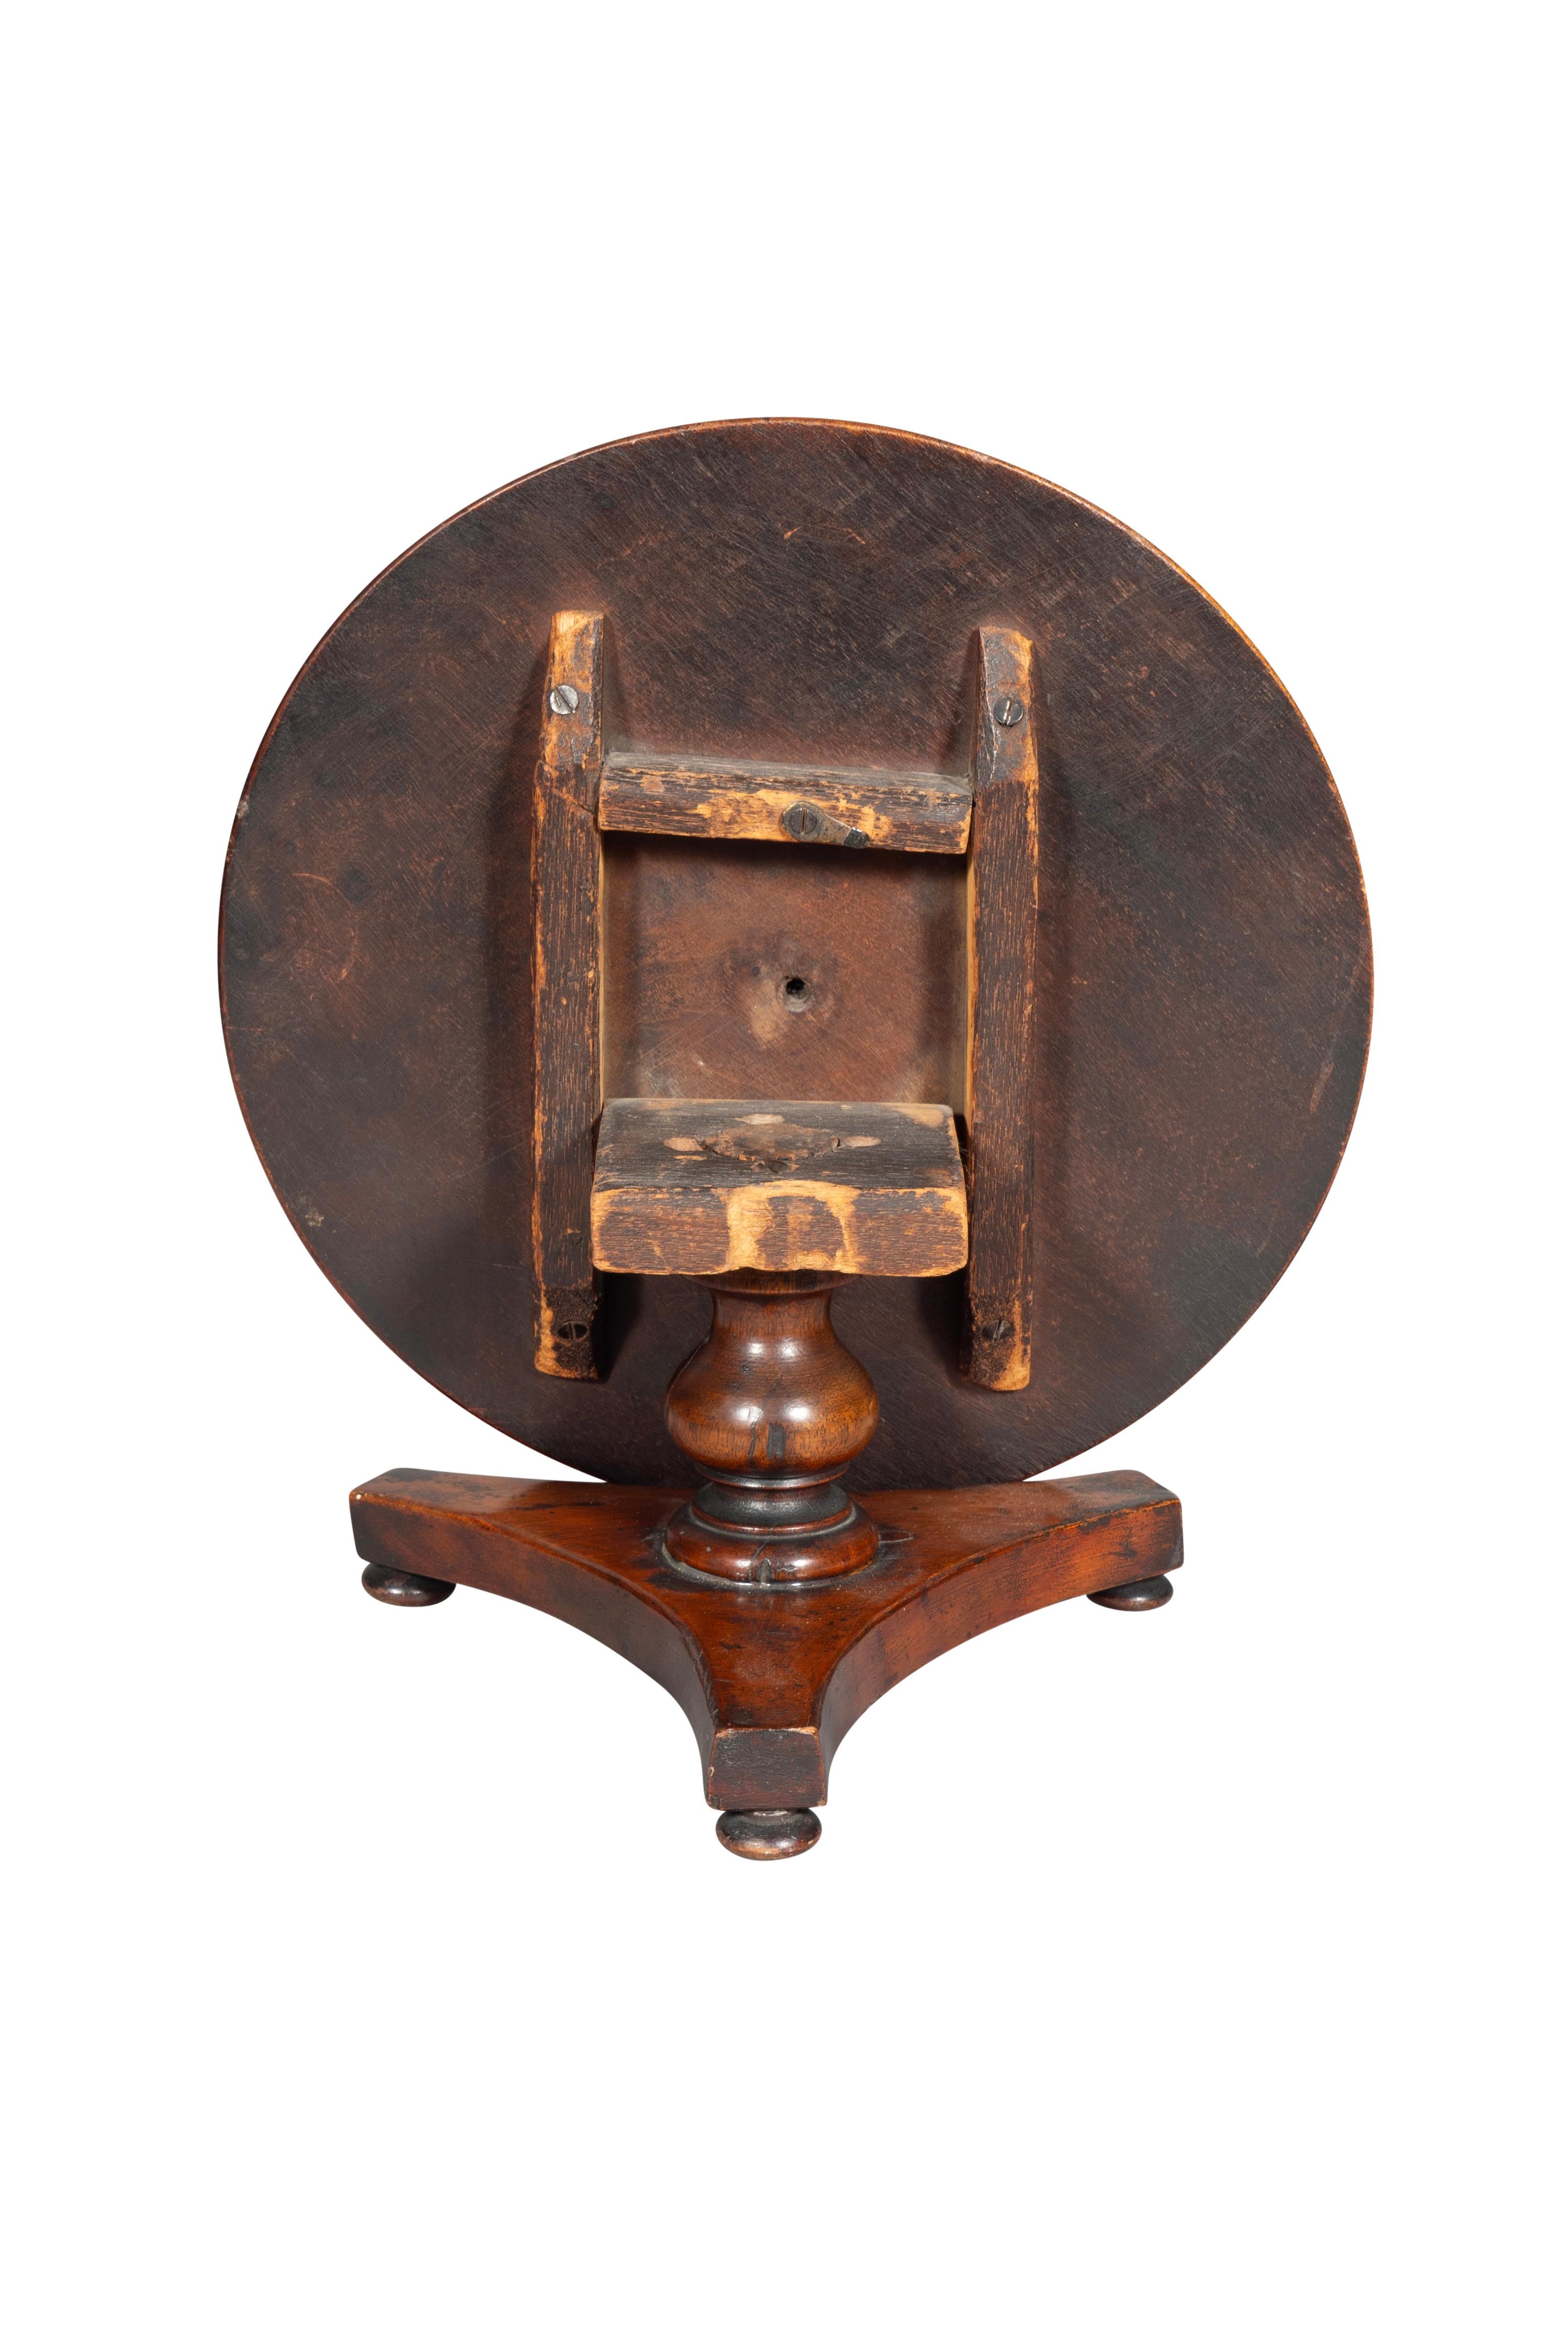 Early Victorian Mahogany Candle Riser In The Form Of A Games Table In Good Condition For Sale In Essex, MA